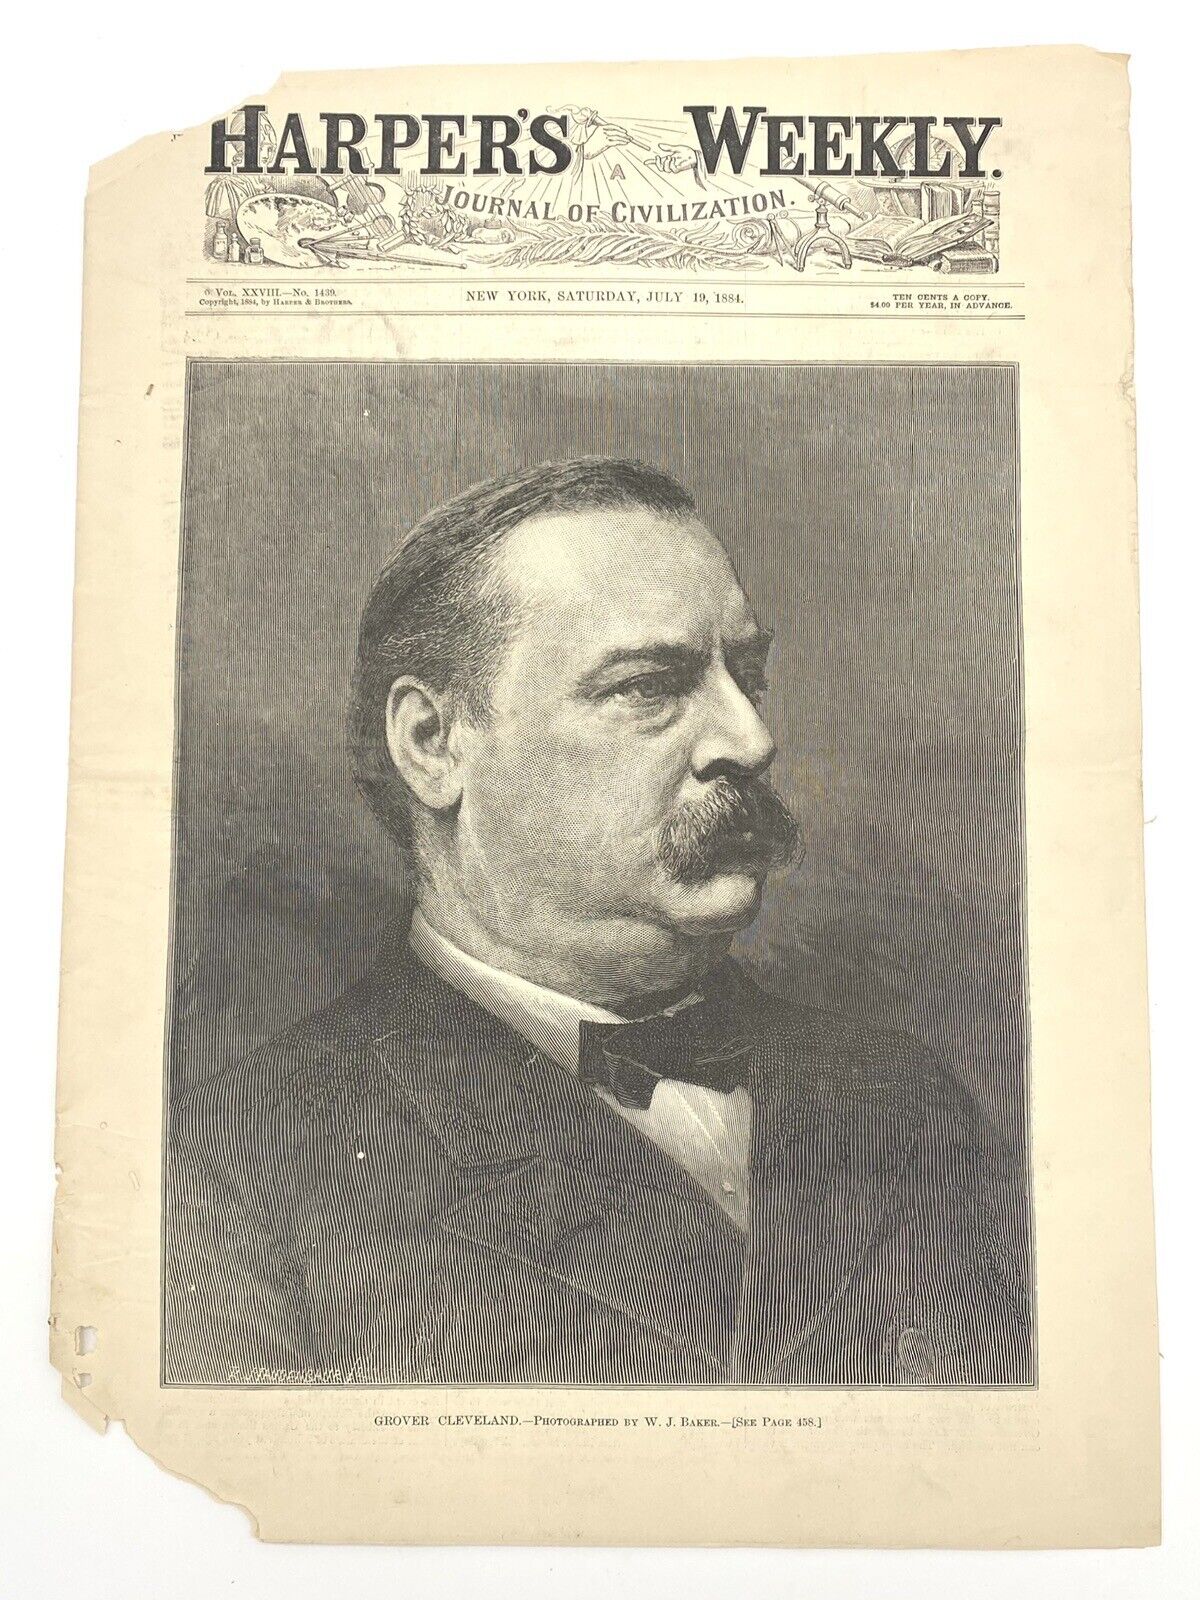 Harper’s Weekly Magazine Newspaper July 19th 1884 Grover Cleveland Cover